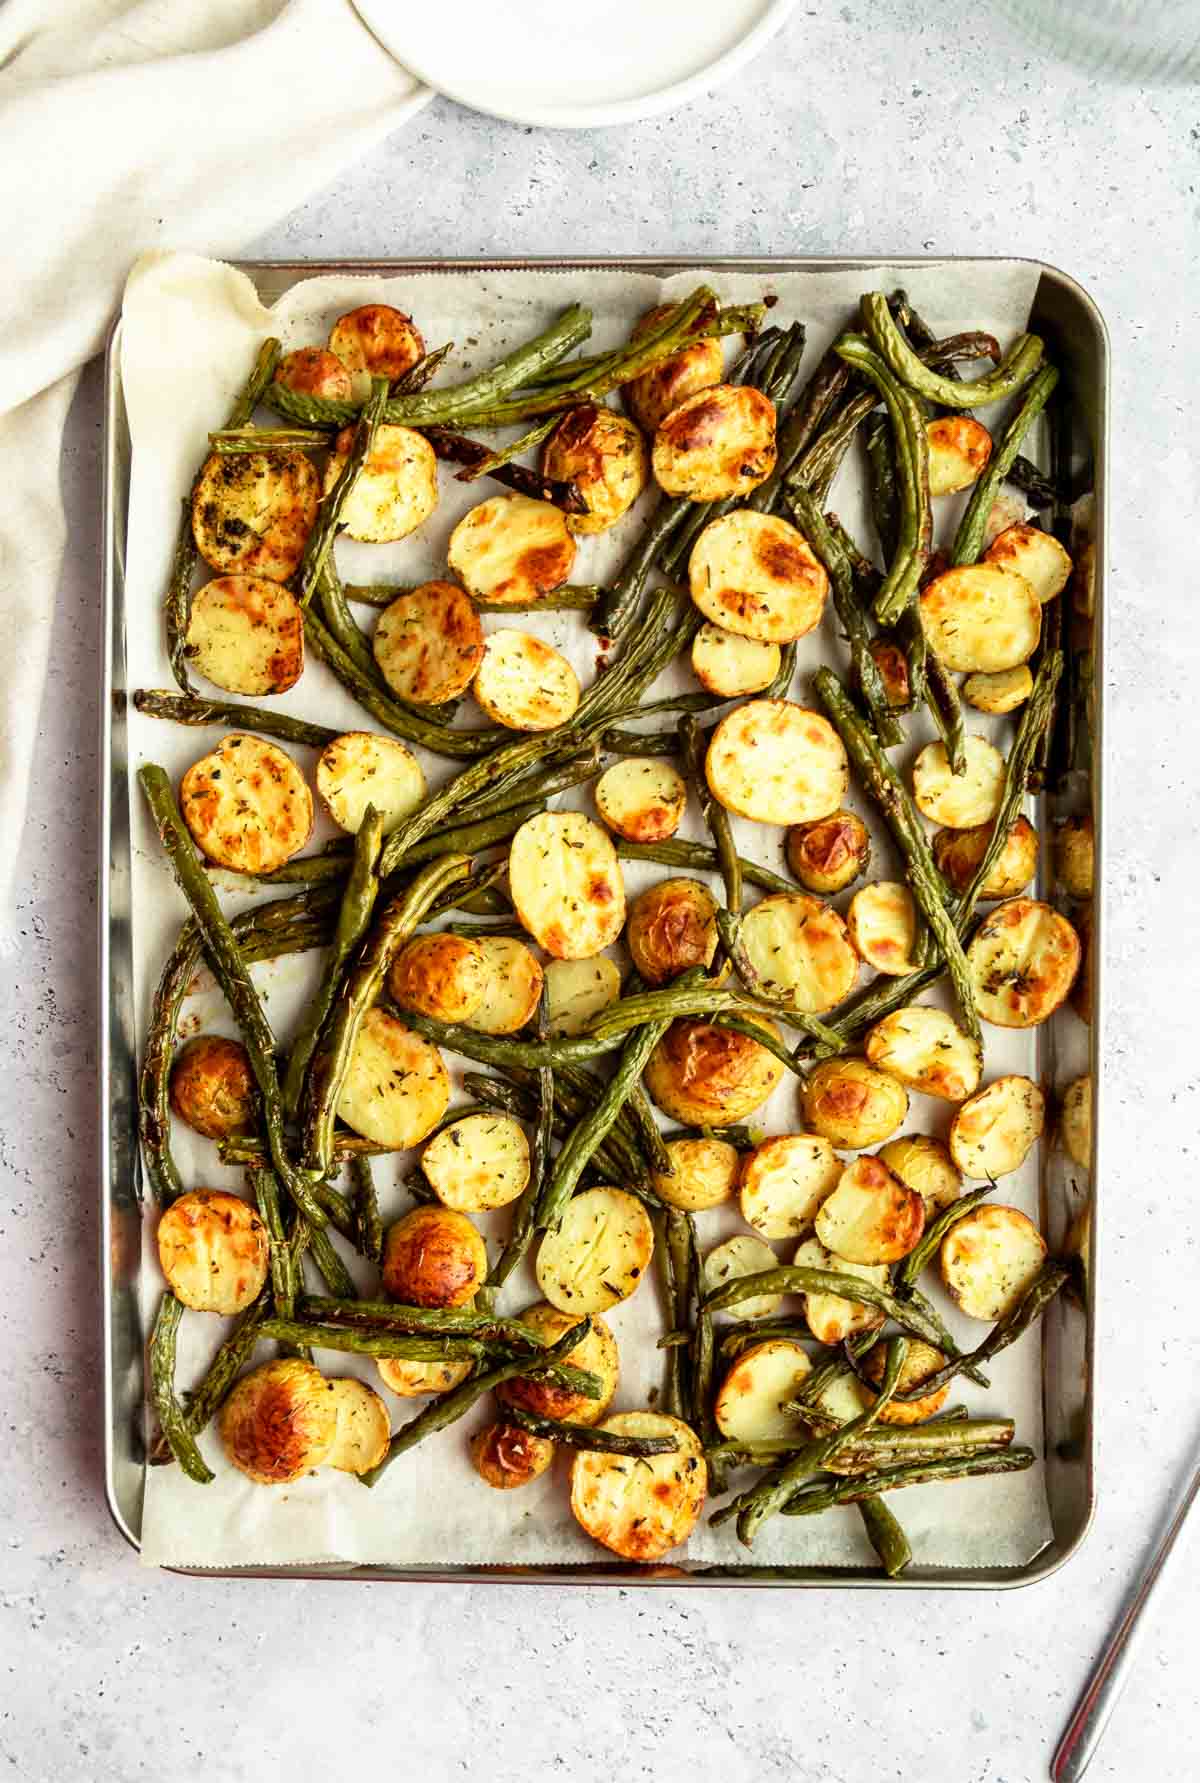 Top of potatoes and green beans on a sheet pan.